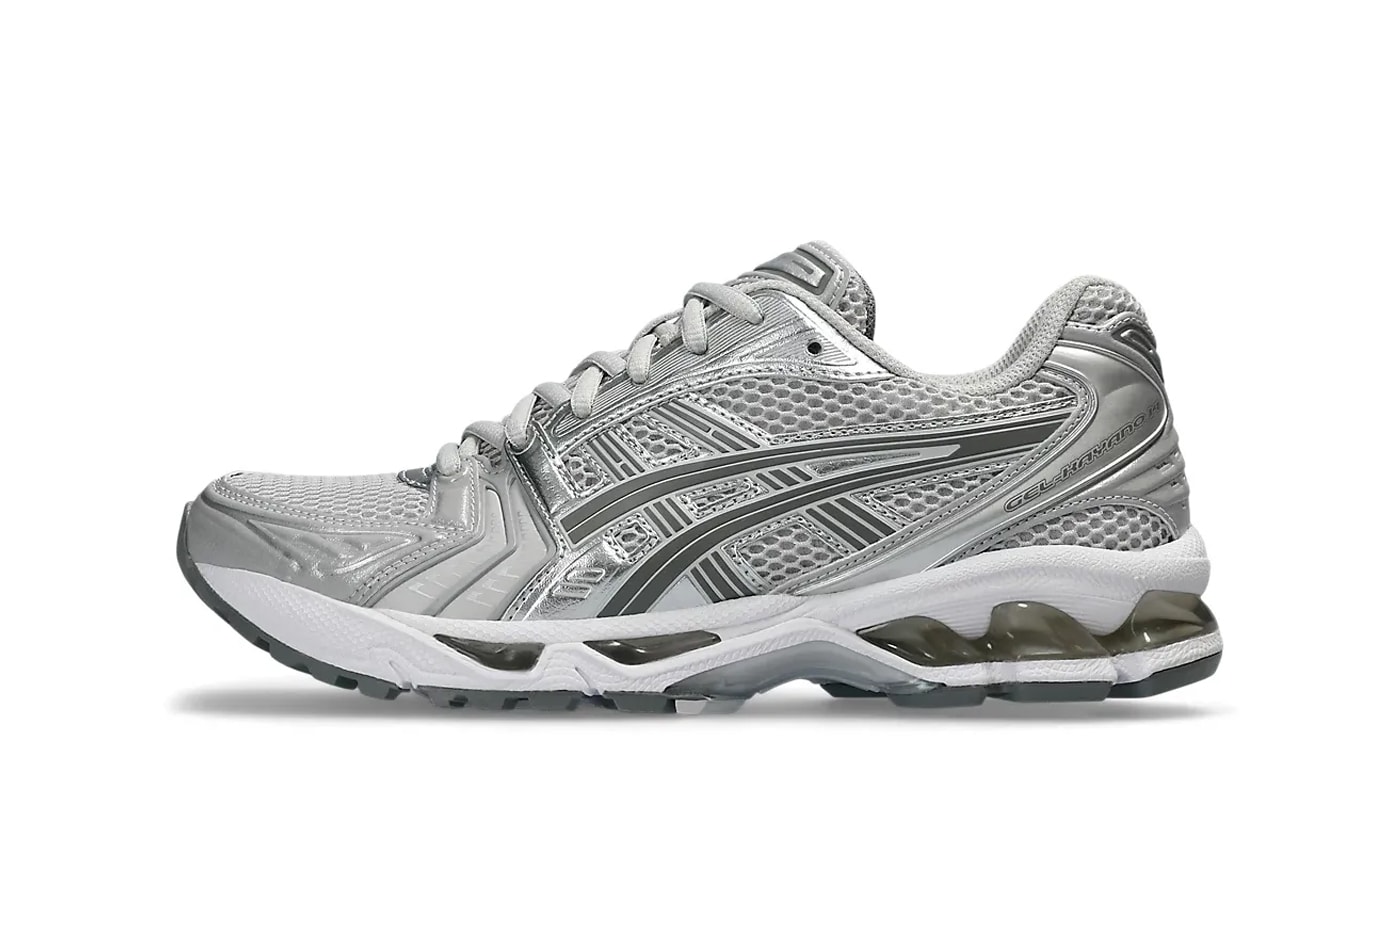 ASICS GEL-KAYANO 14 "Cloud Grey" 1202A056-021 Release info all grey hue color scheme comfort shoes sneakers dad shoes